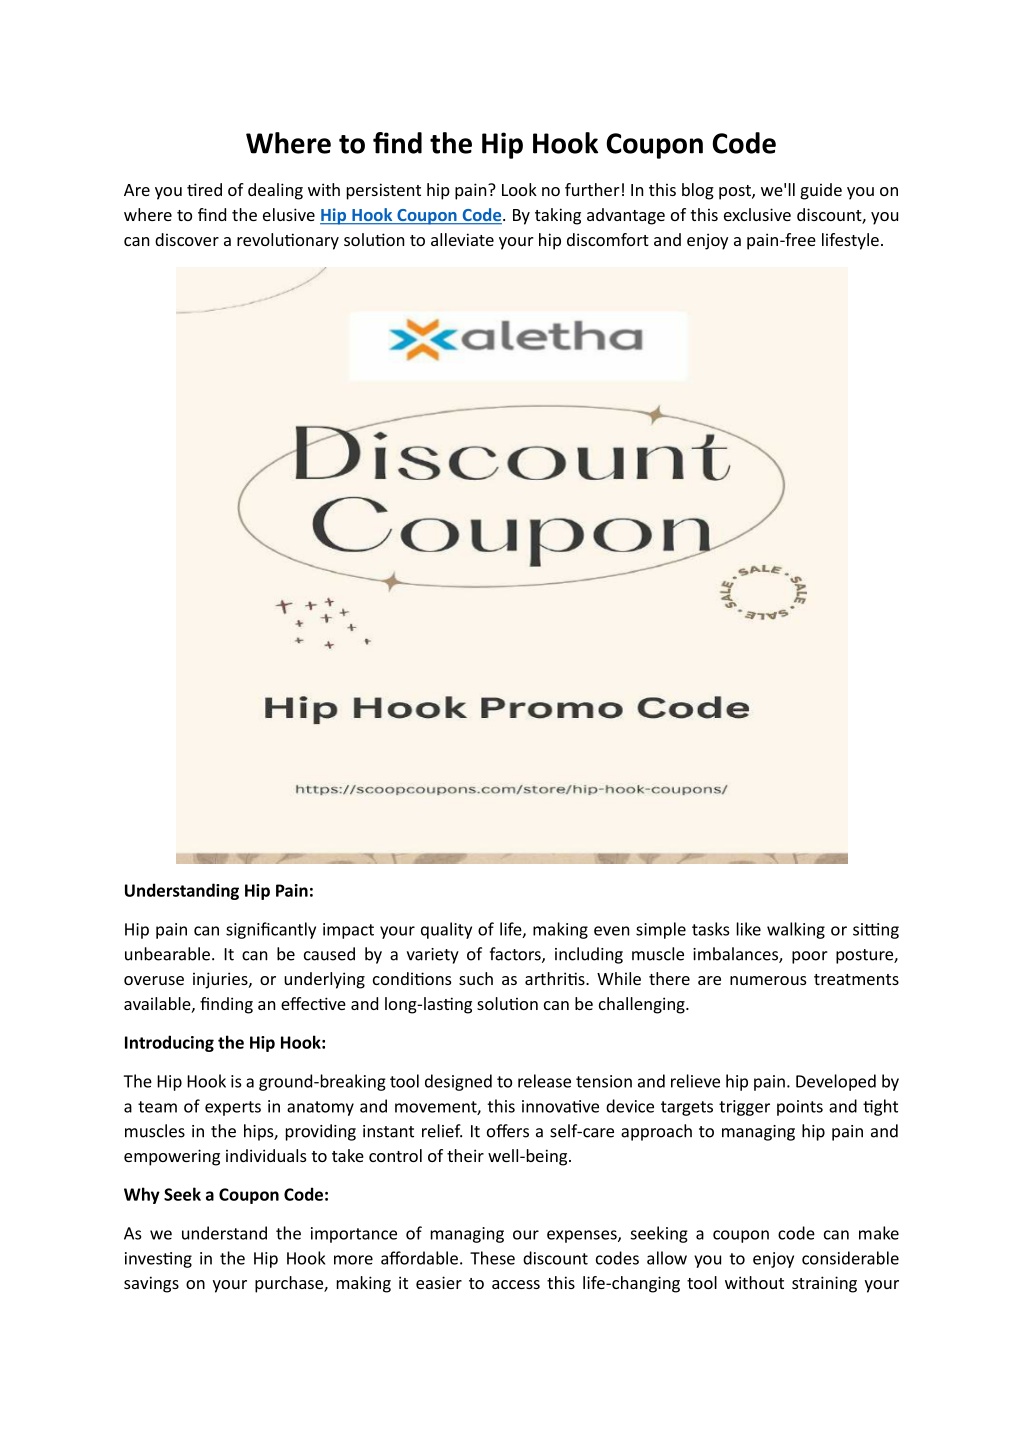 PPT - Where to find the Hip Hook Coupon Code PowerPoint